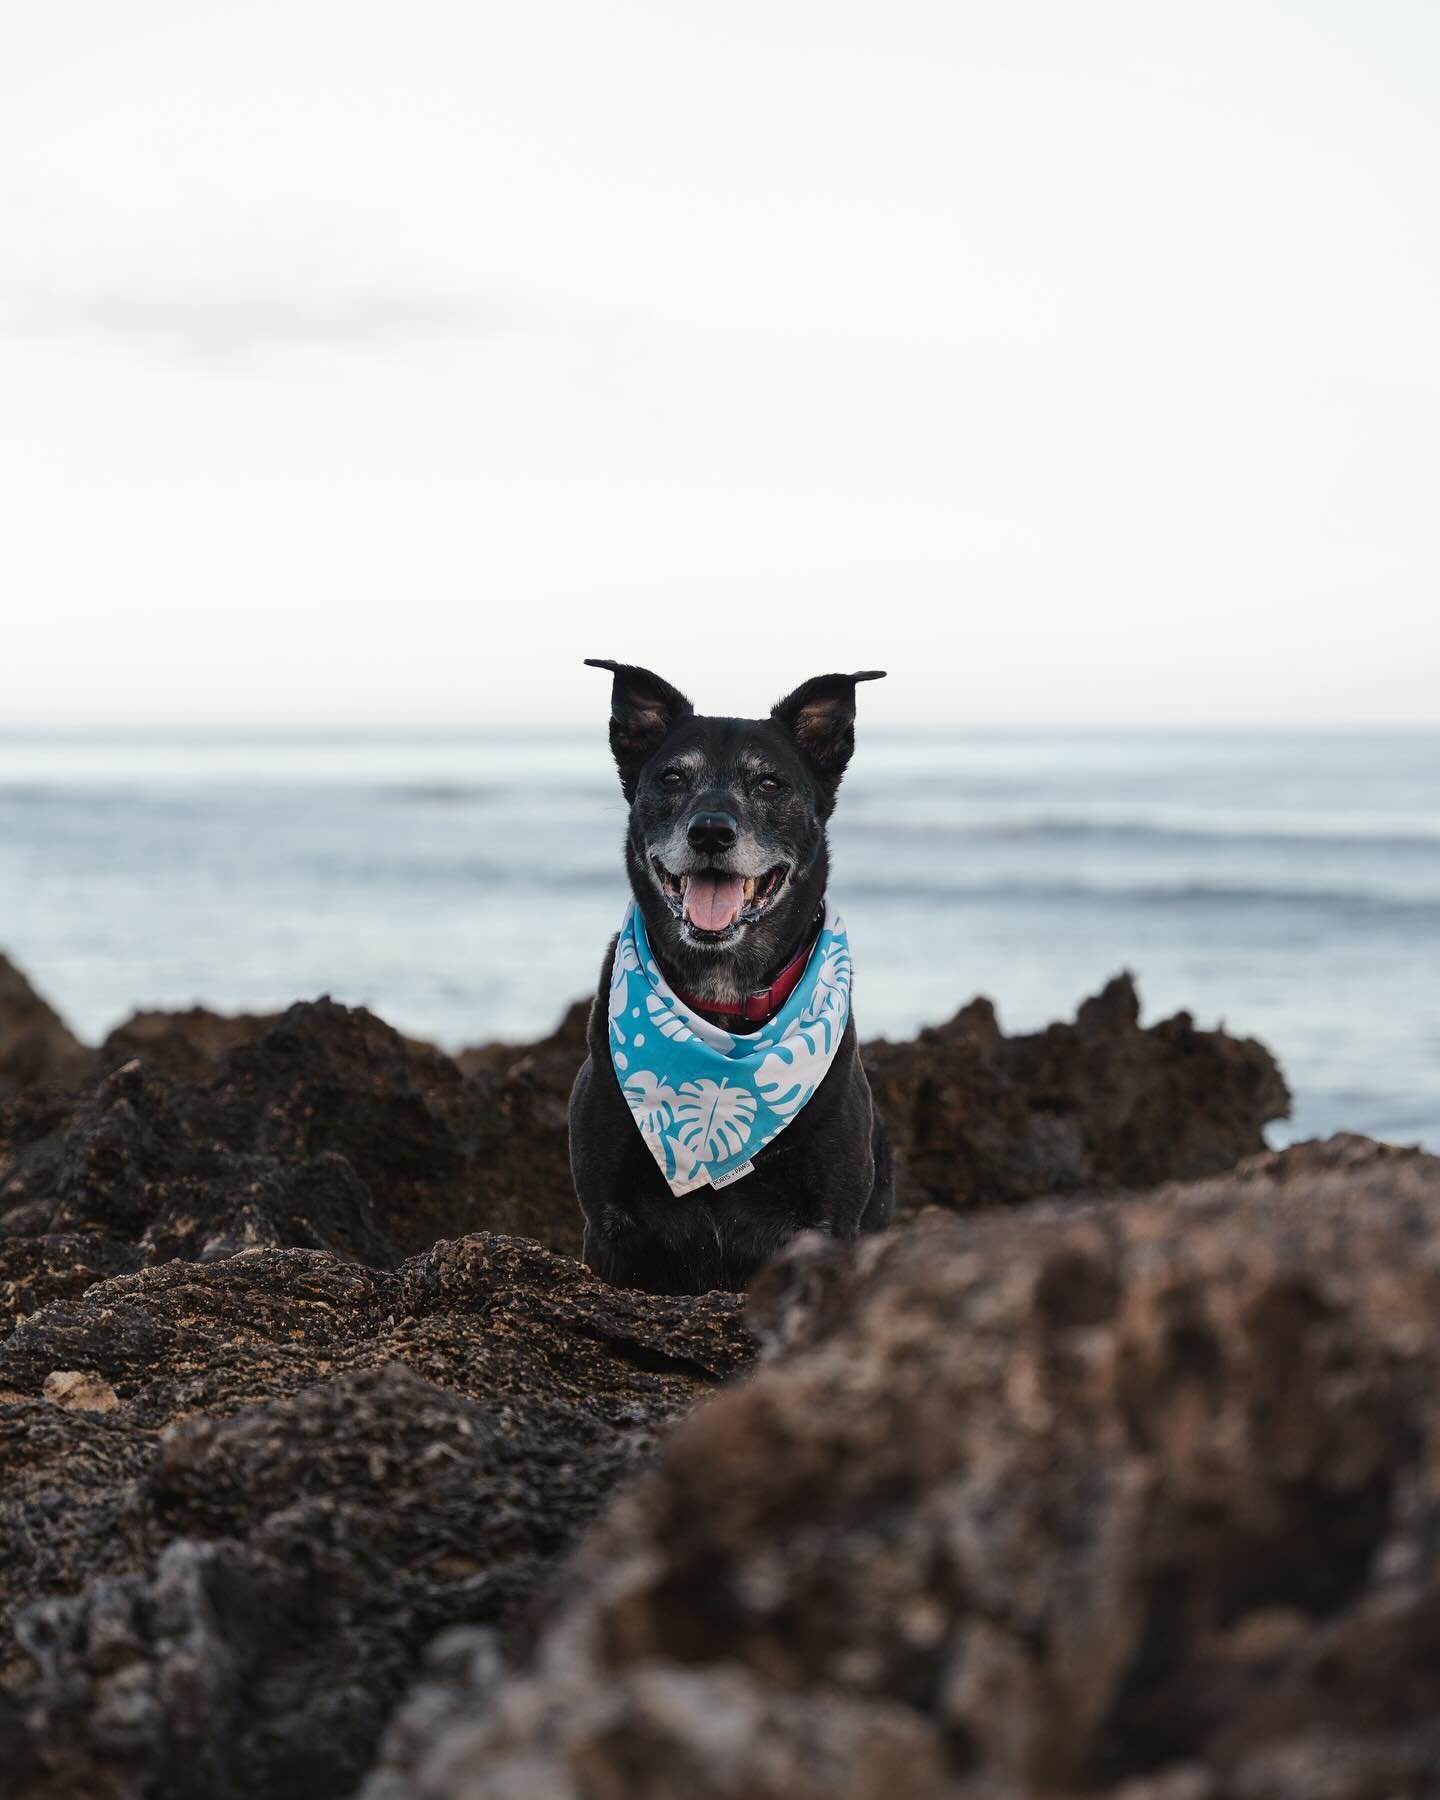 One of my favorite outdoor dog photoshoot so far! Had to get up at 4 am to drive down to Haleiwa for the perfect morning for a photoshoot. Dax did an amazing job and is a natural in front of the camera and making my job easy. 

Thank you to @grooming